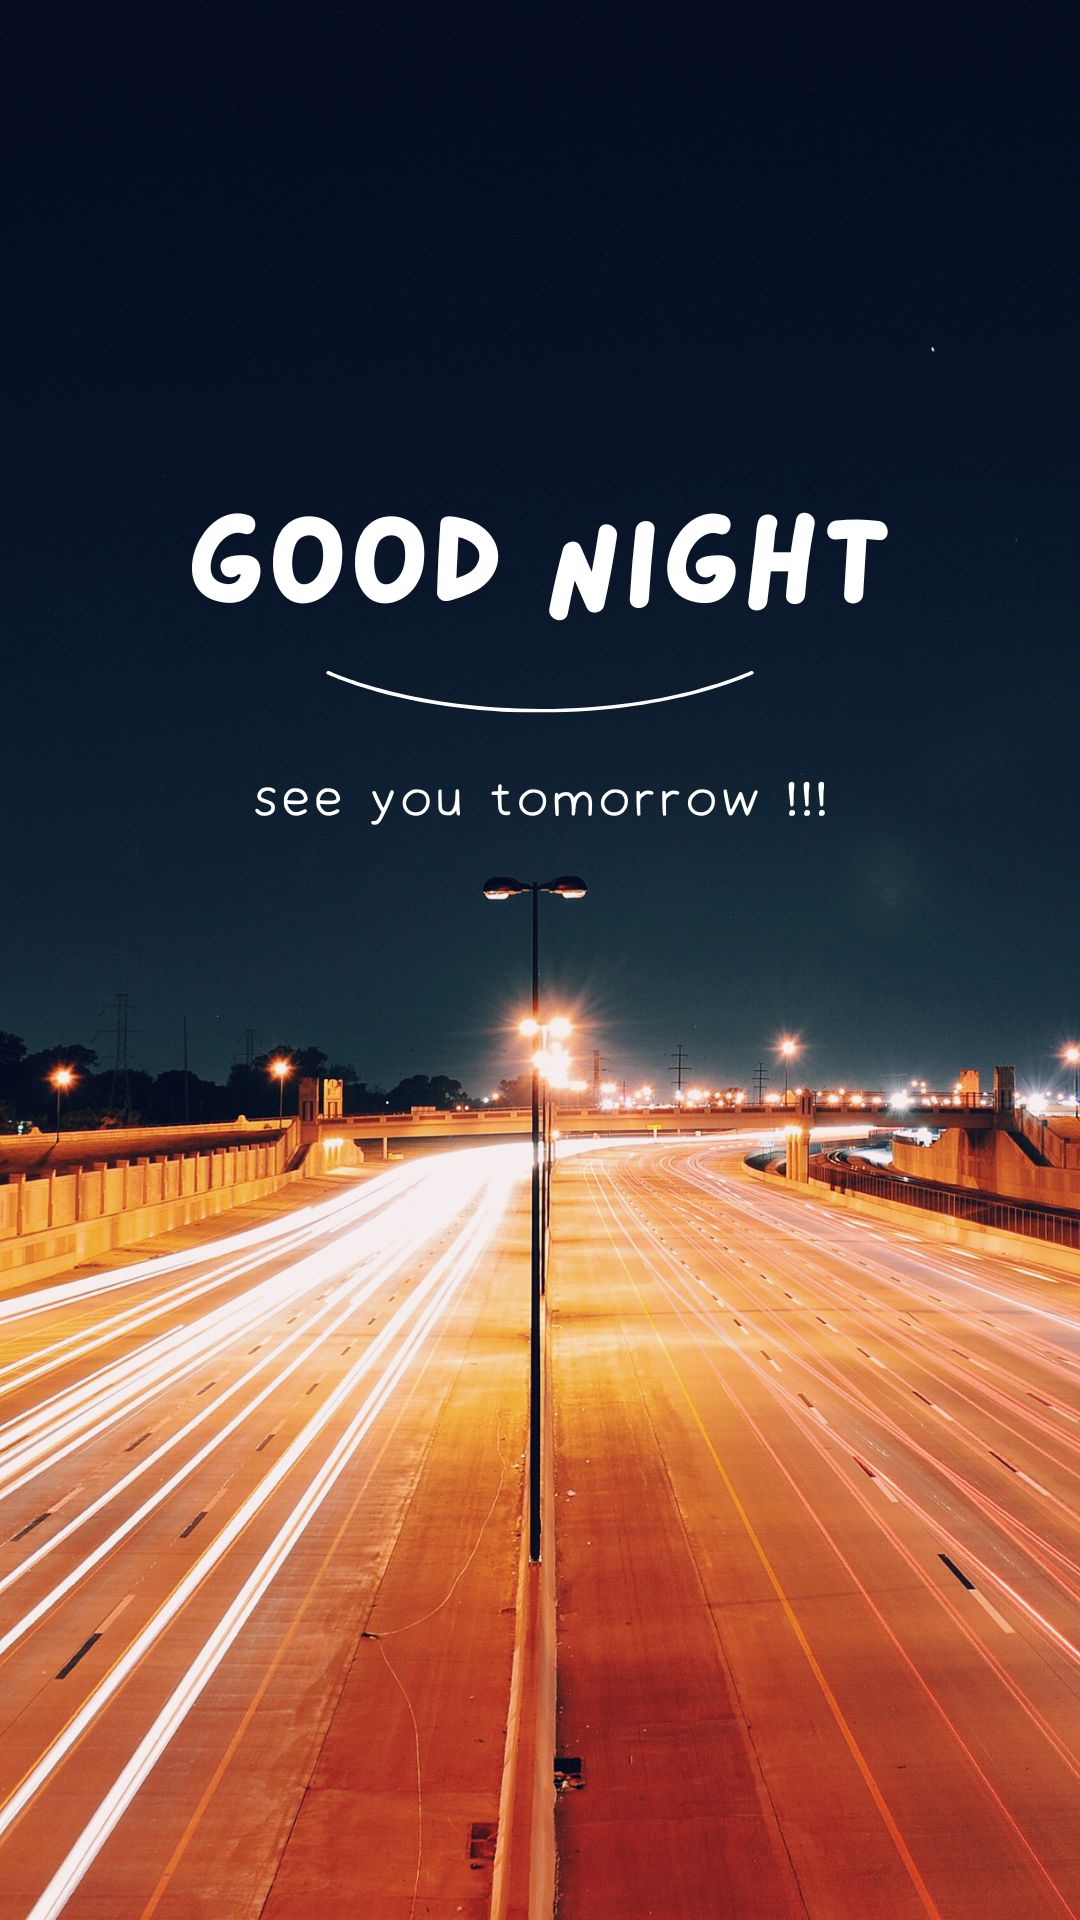 good night images instagram story night road